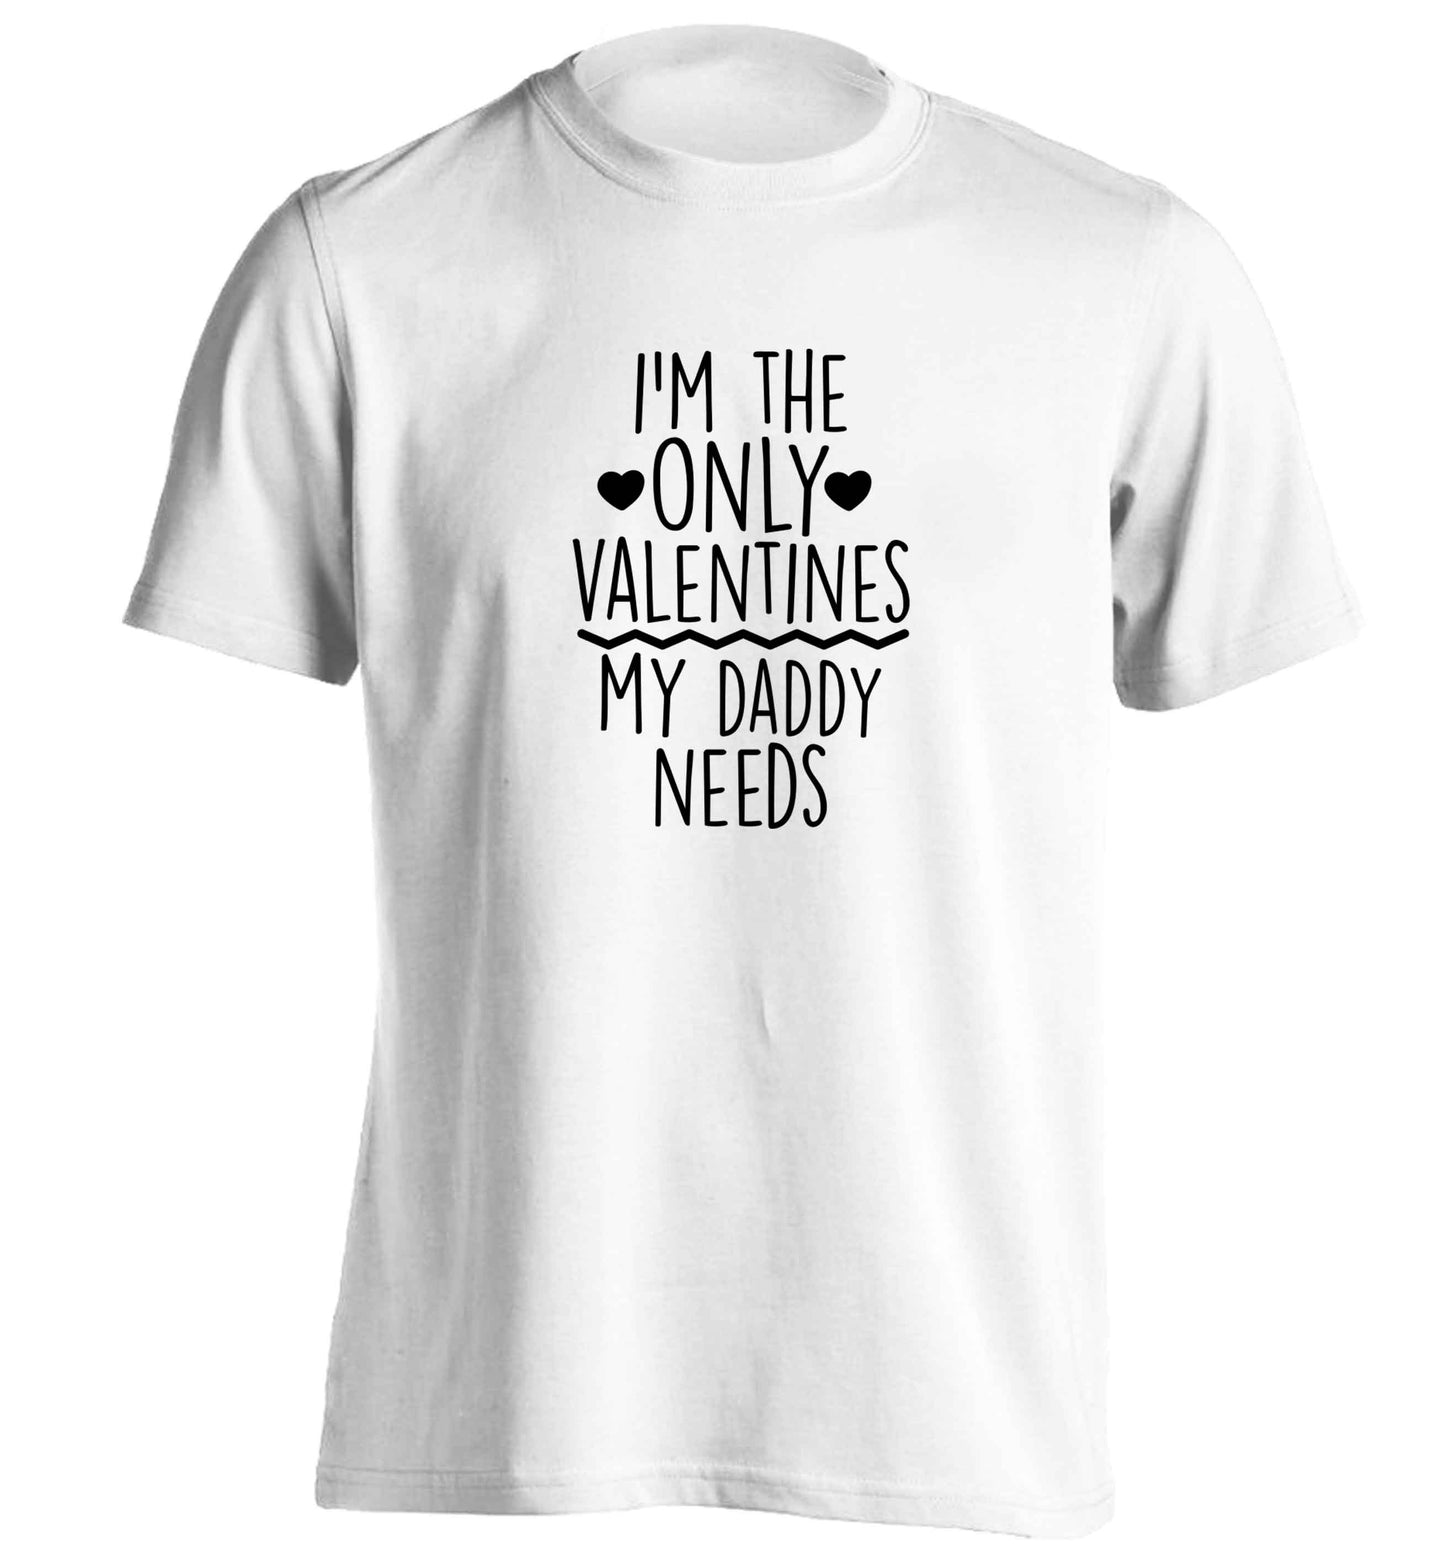 I'm the only valentines my daddy needs adults unisex white Tshirt 2XL